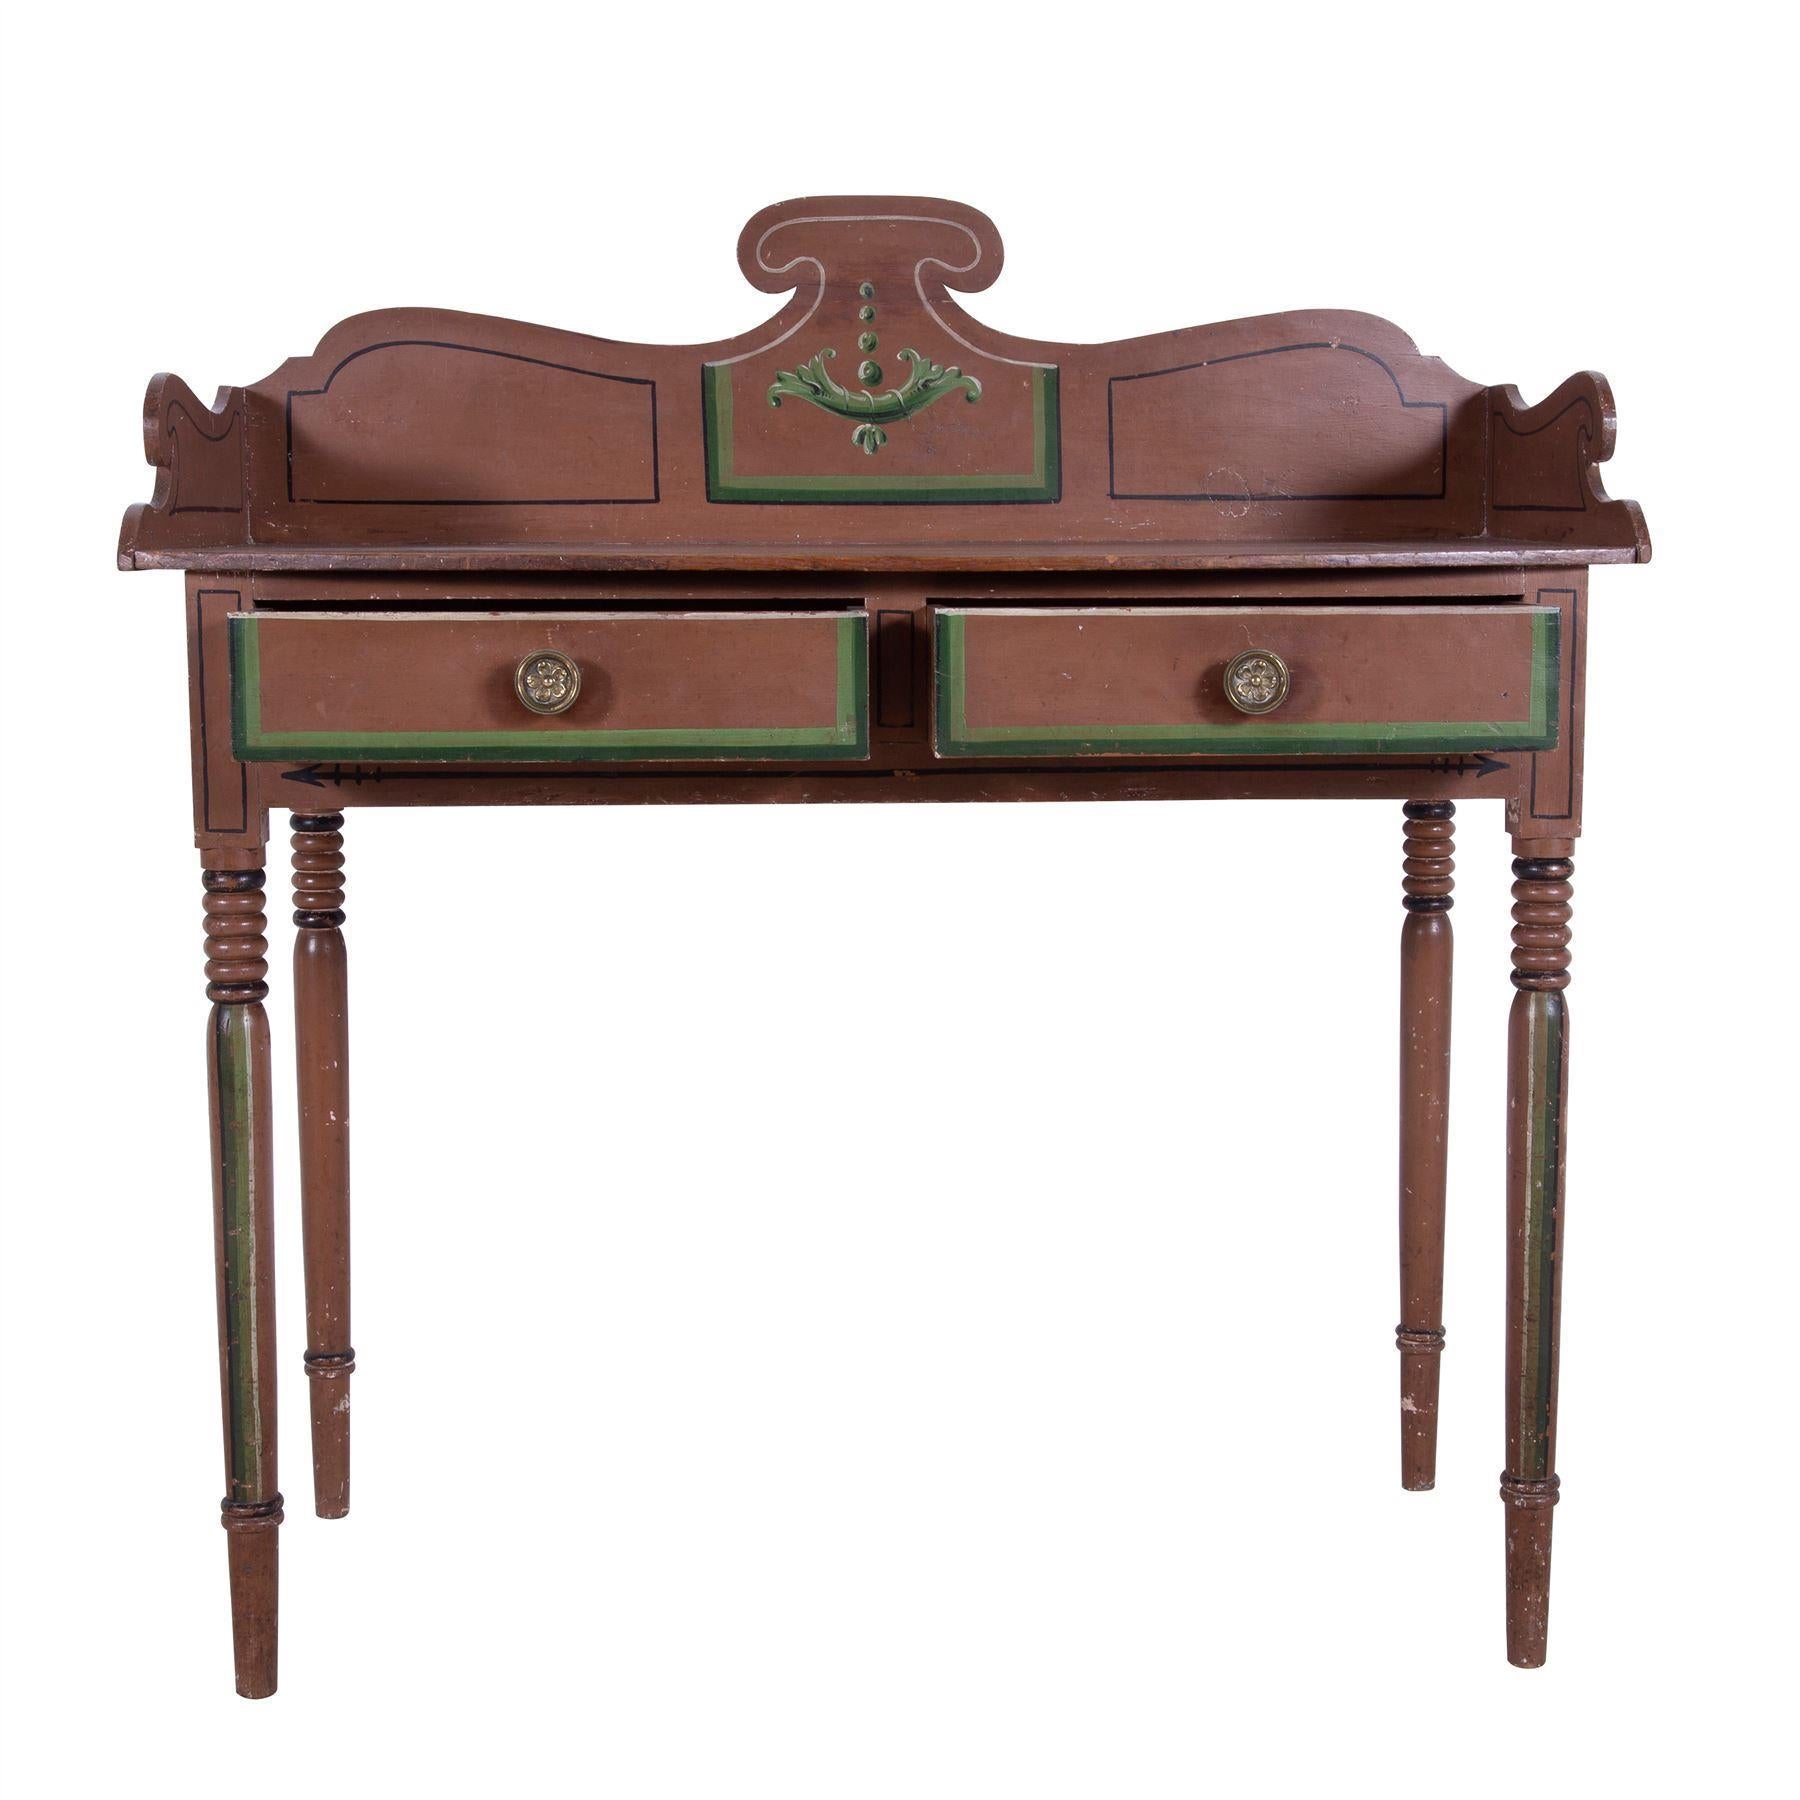 A 19th century painted pine two-drawer side table. 

Table surface H 77cm / leg clearance H 61cm.